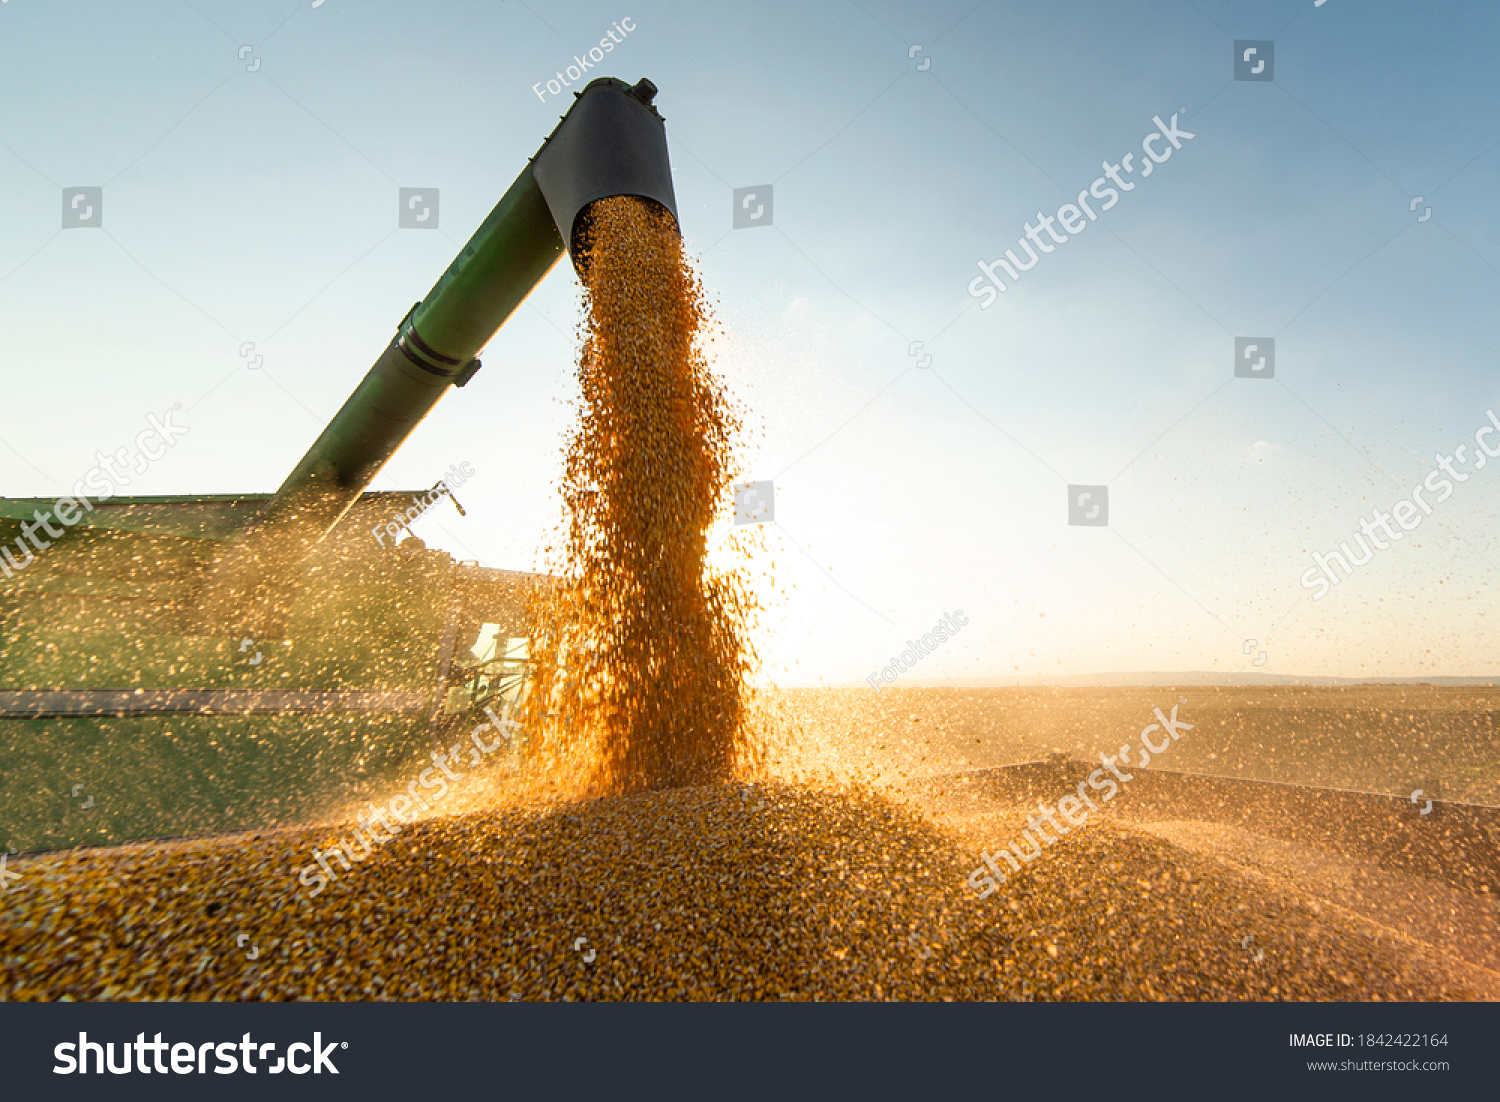 Grain auger of combine pouring soy bean into tractor trailer #1842422164